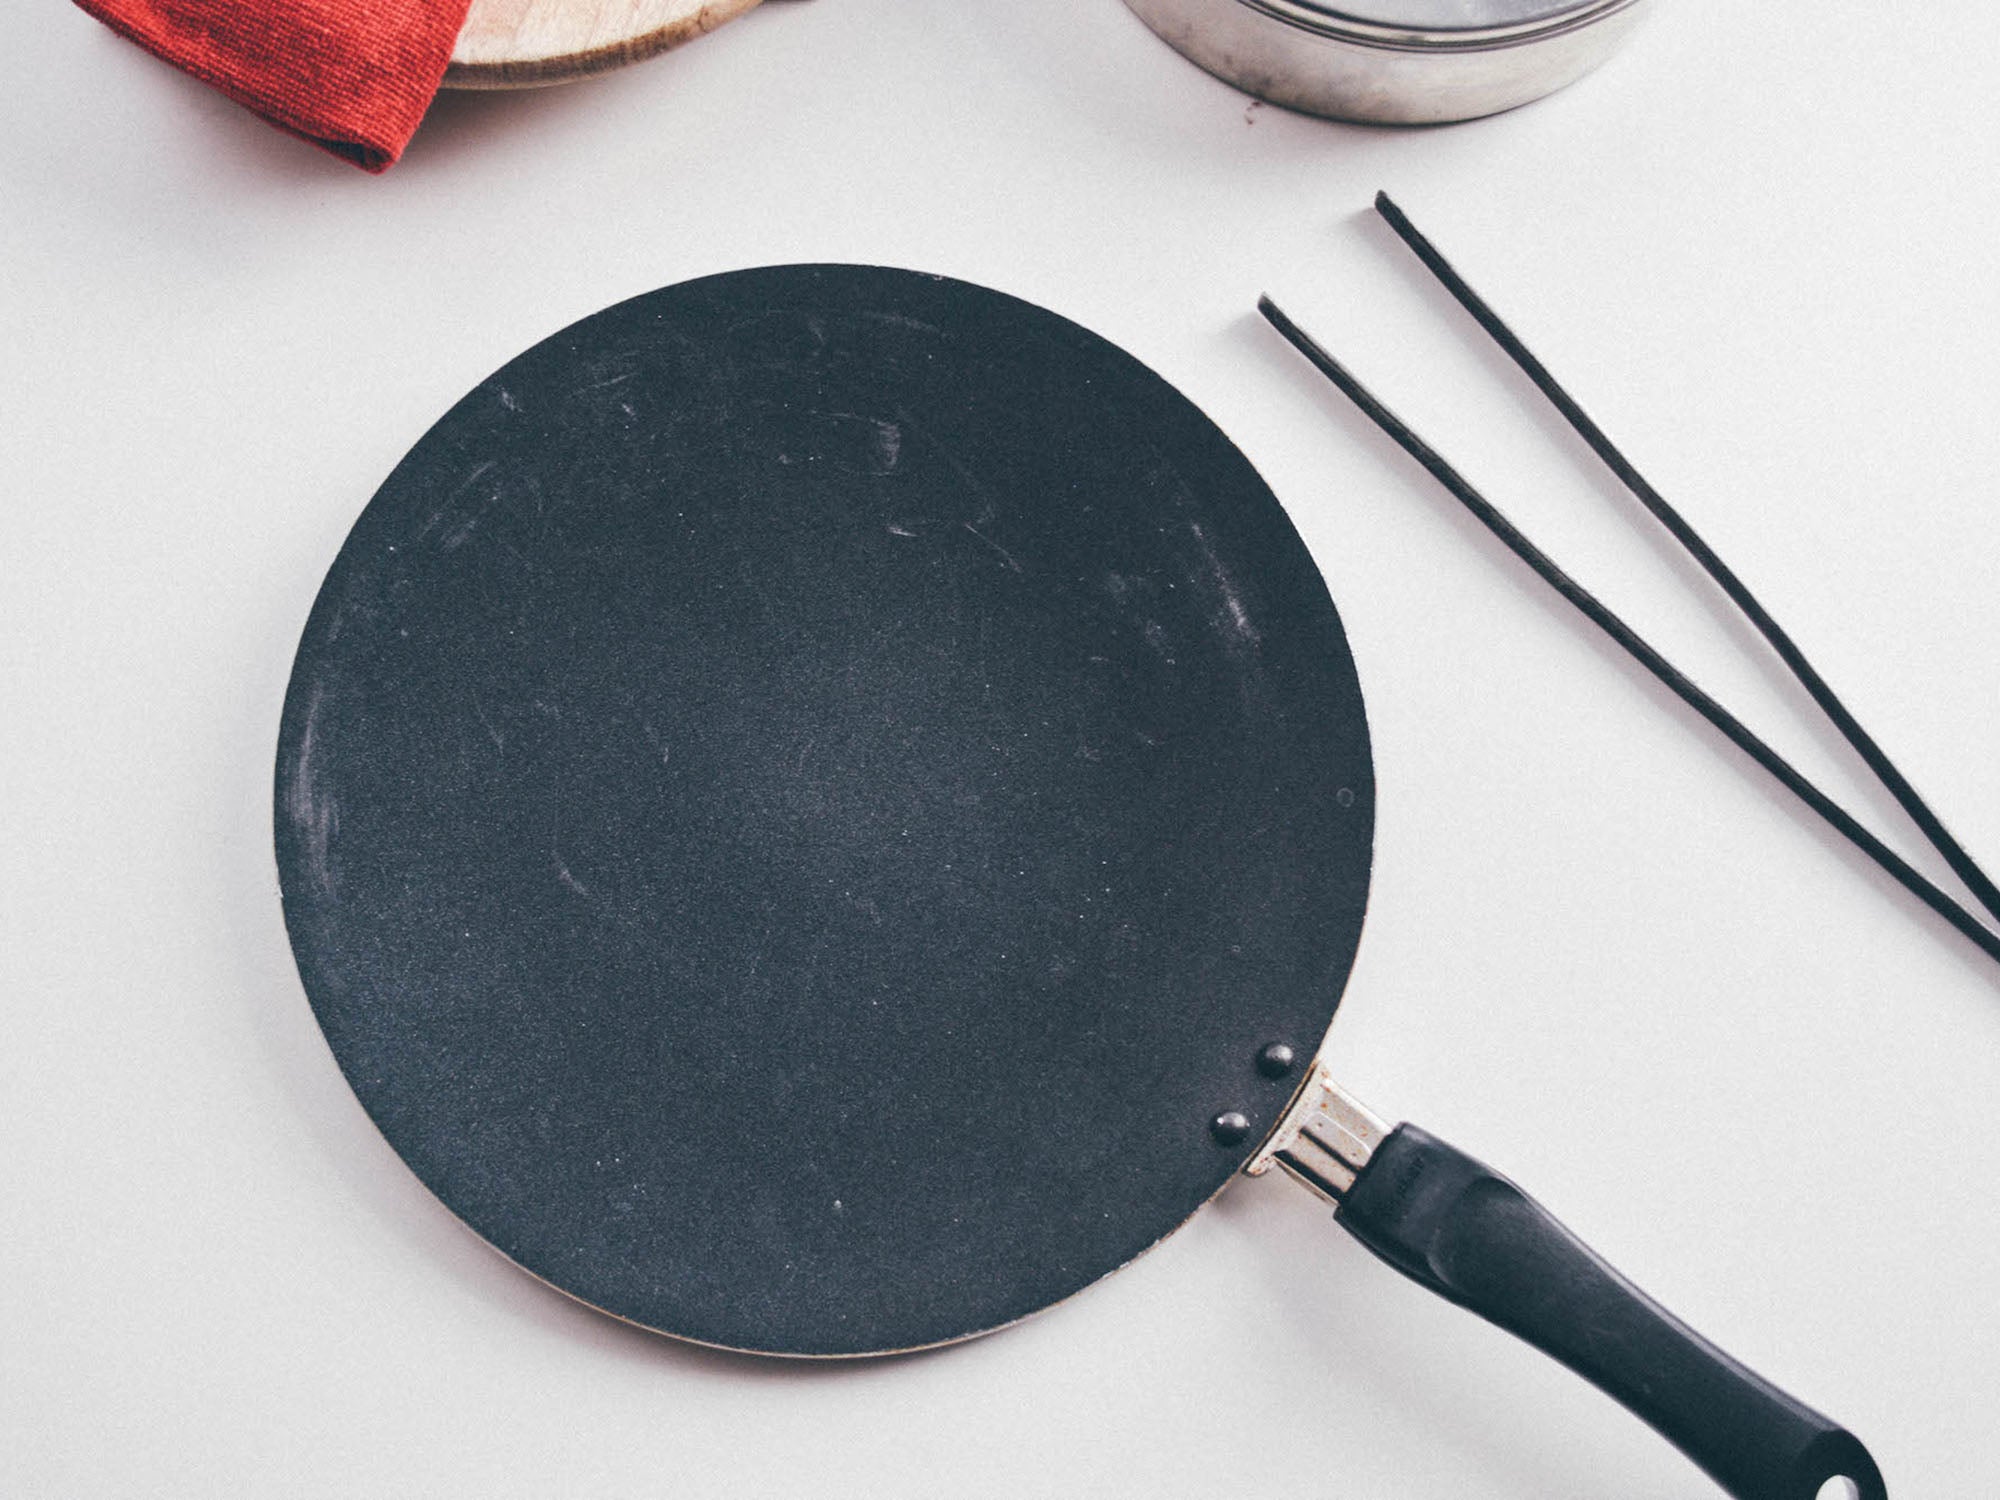 Spusht: List of Utensils, Cooking Tools, and Items for the Indian Kitchen  (and beyond)